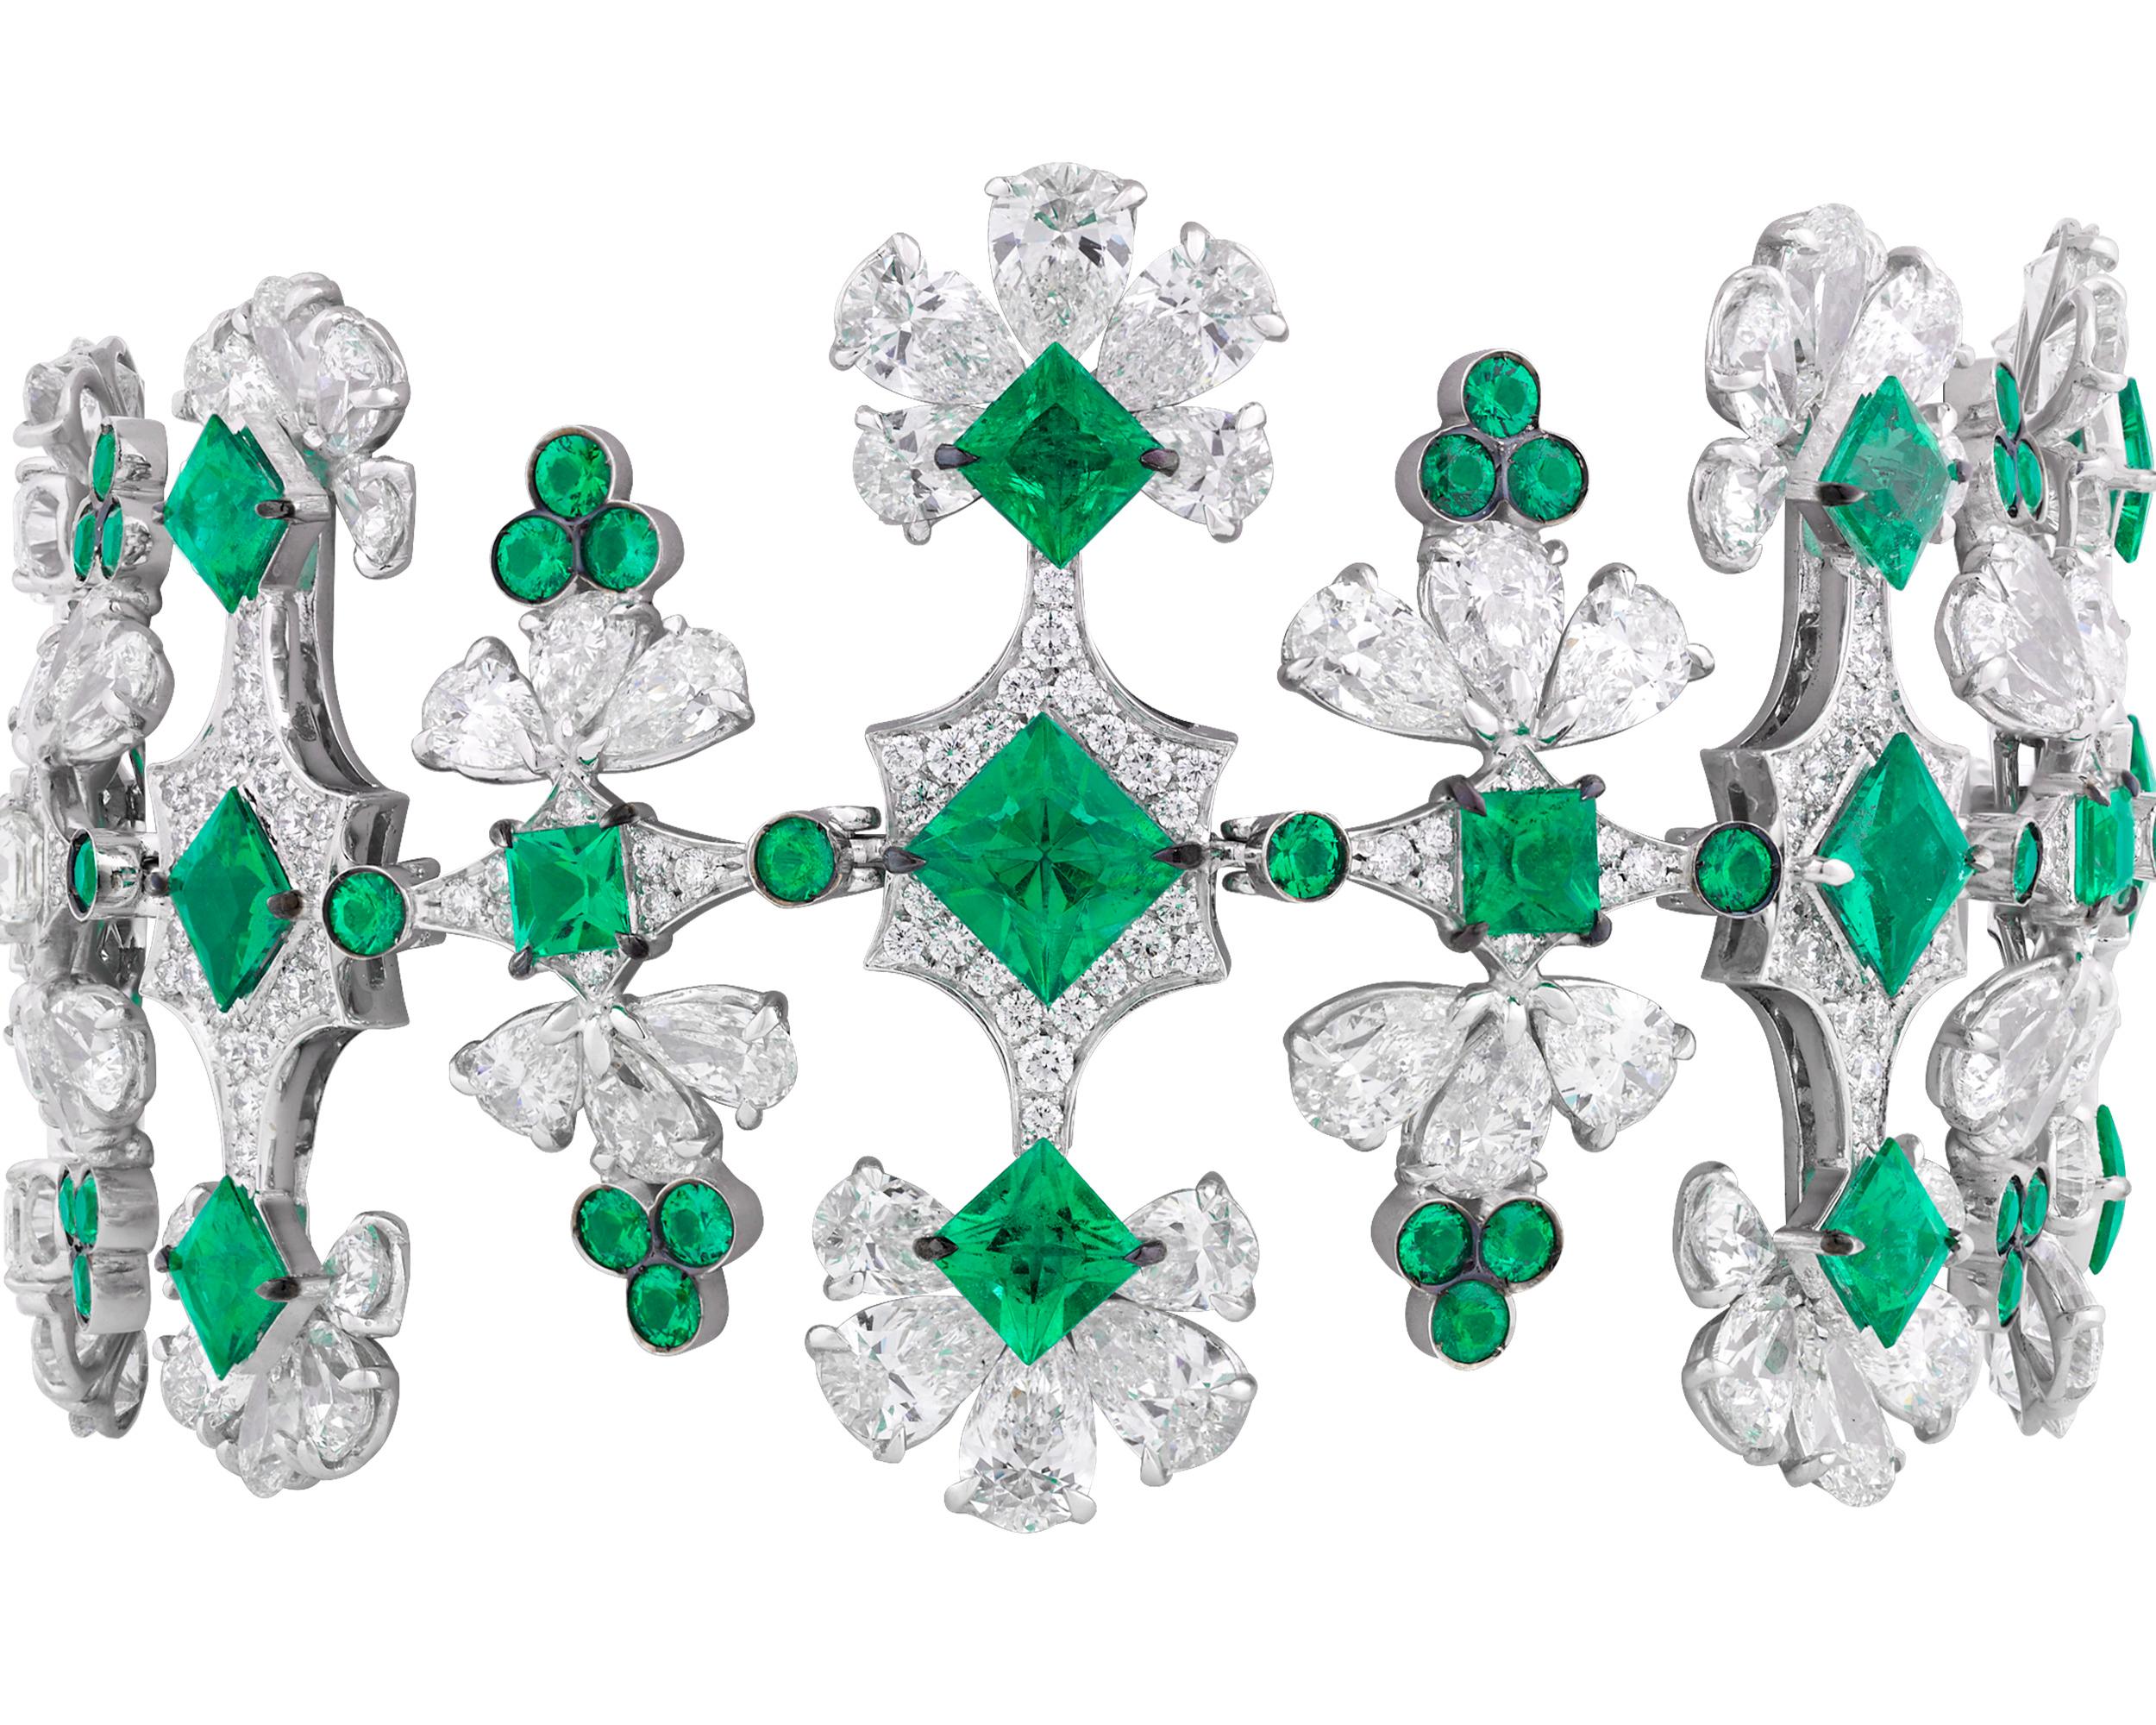 An array of round and pear-shaped diamonds are joined by verdant emeralds in this one-of-a-kind Italian bracelet. The highly unique design incorporates approximately 41.98 carats of brilliant white diamonds with 13.74 total carats of emeralds, all